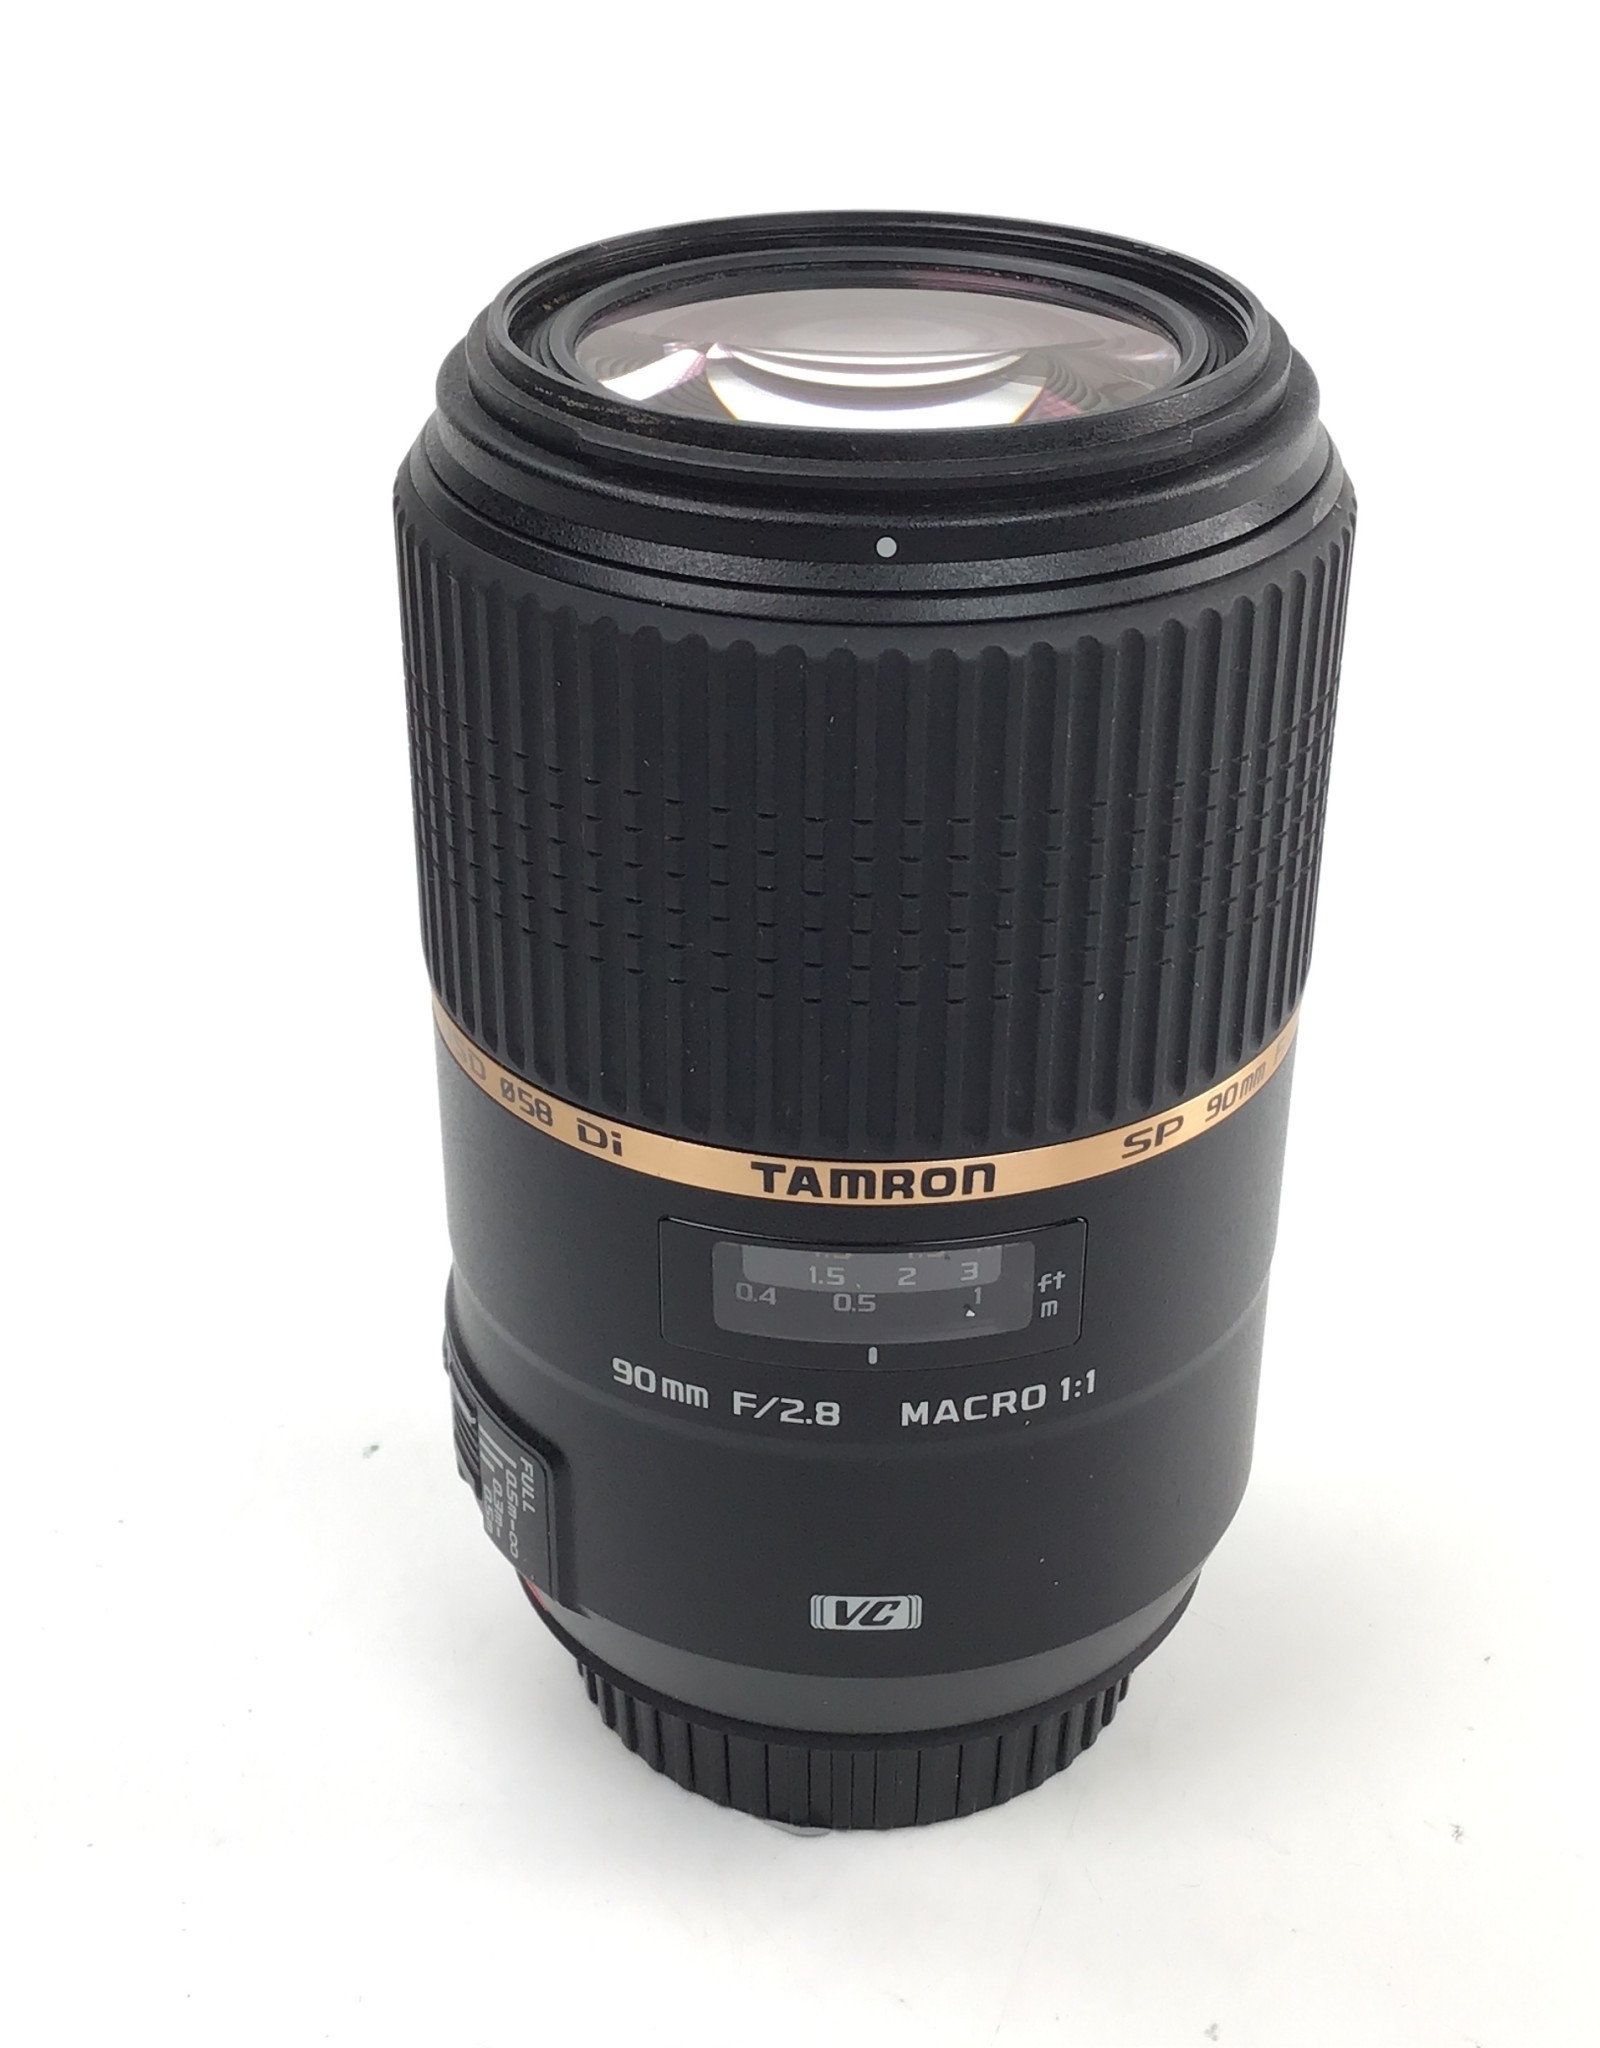 TAMRON Tamron SP 90mm f2.8 Di VC Lens for Canon Used Good